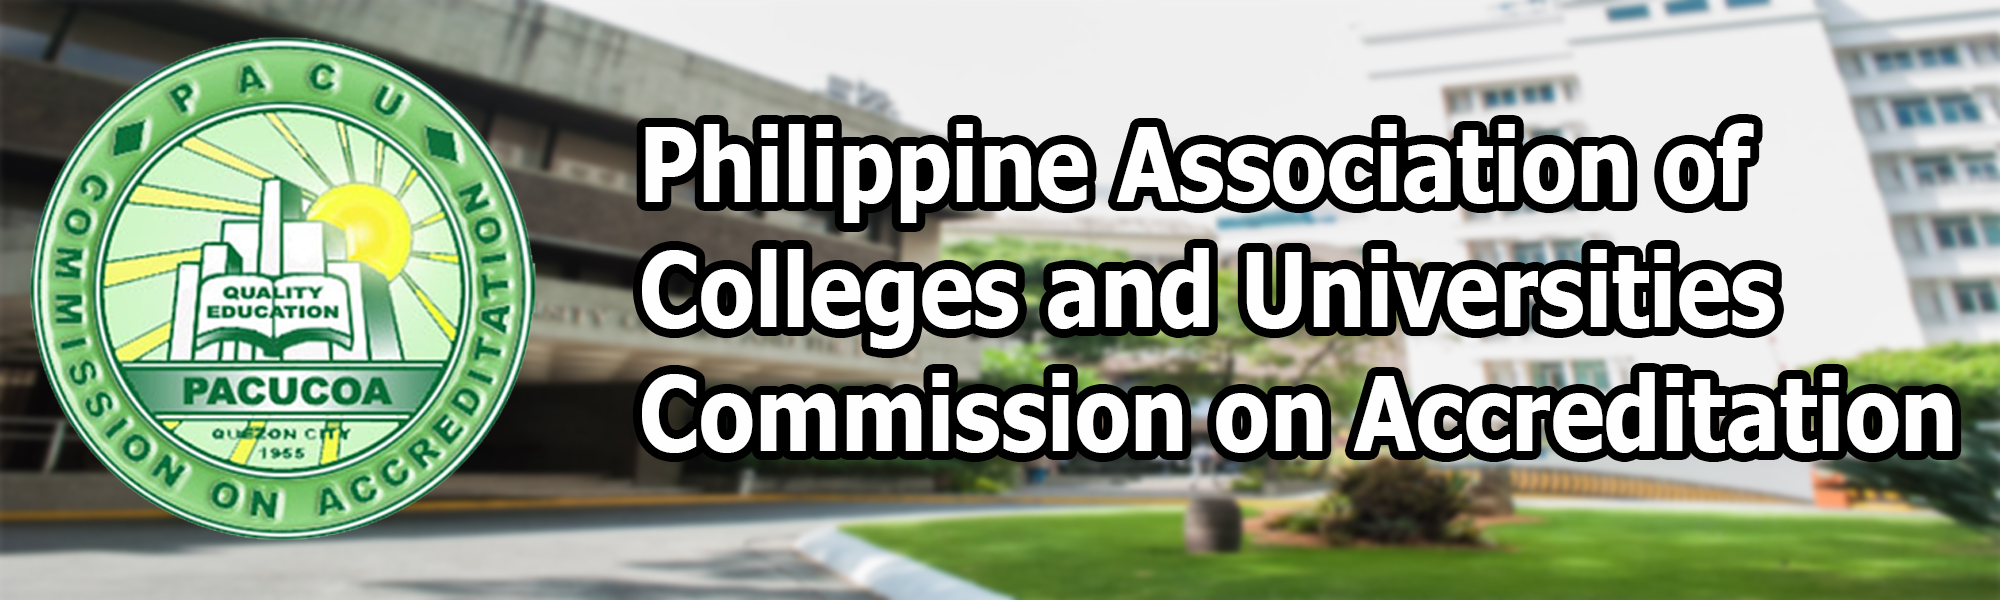 philippine association of colleges and universities